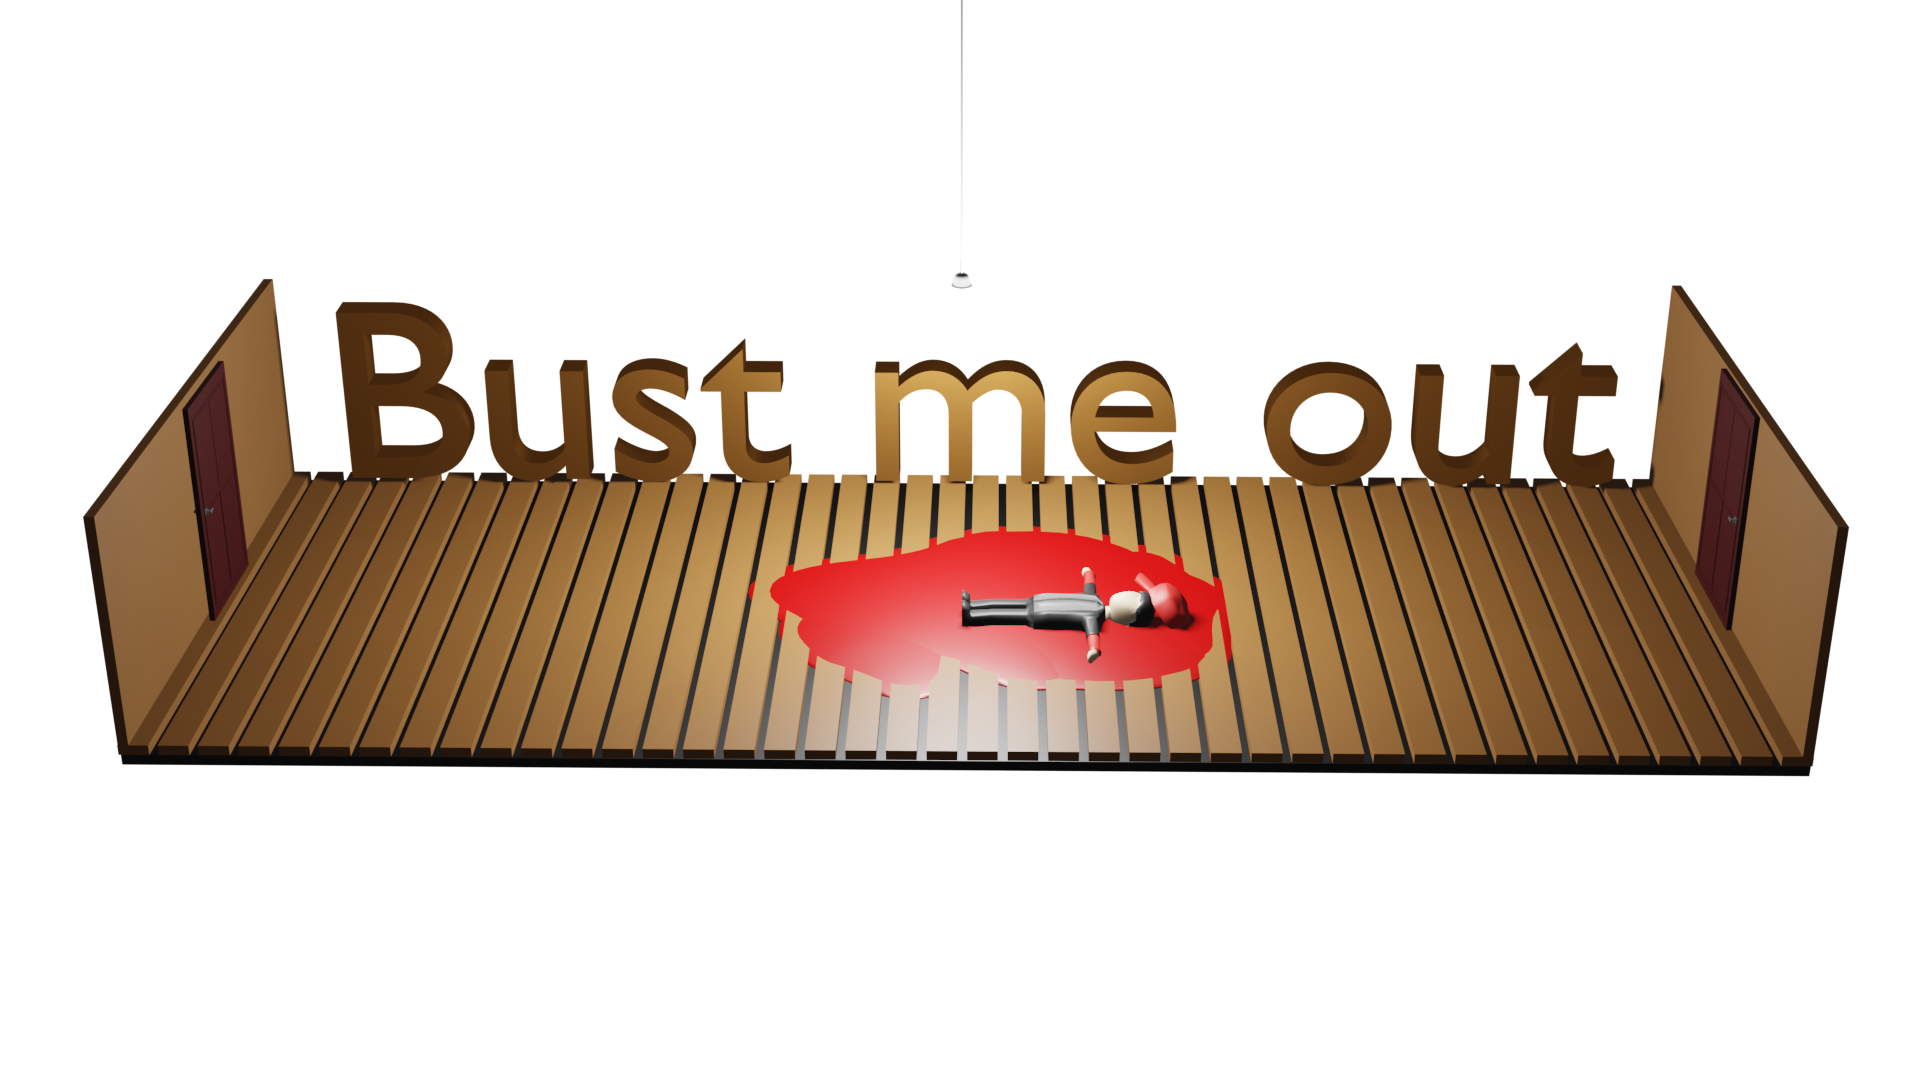 Bust me out : Genetic experiment